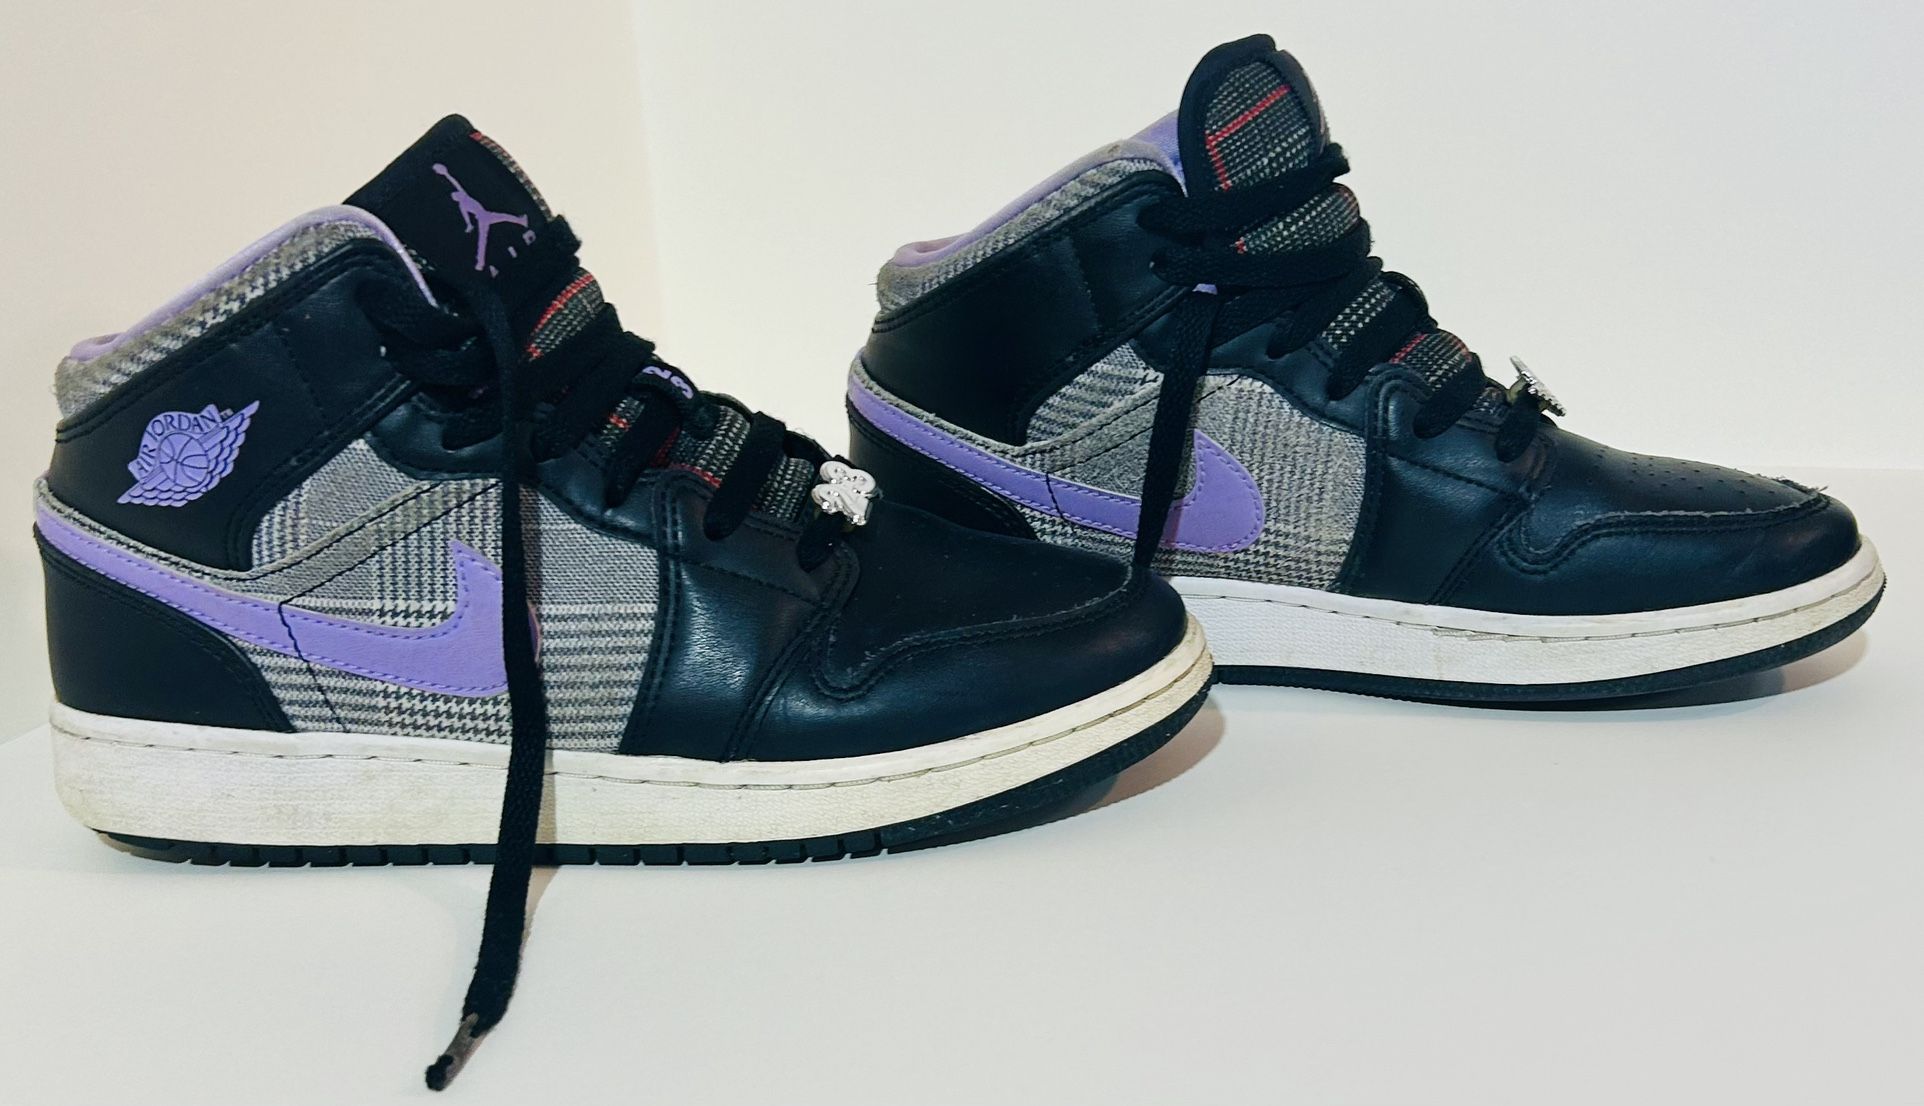 Size 5.5 Y Nike Air Jordan 1 Mid SE (GS) 'Houndstooth' Youth Shoes/Wmns Size 7 Wmns. / 